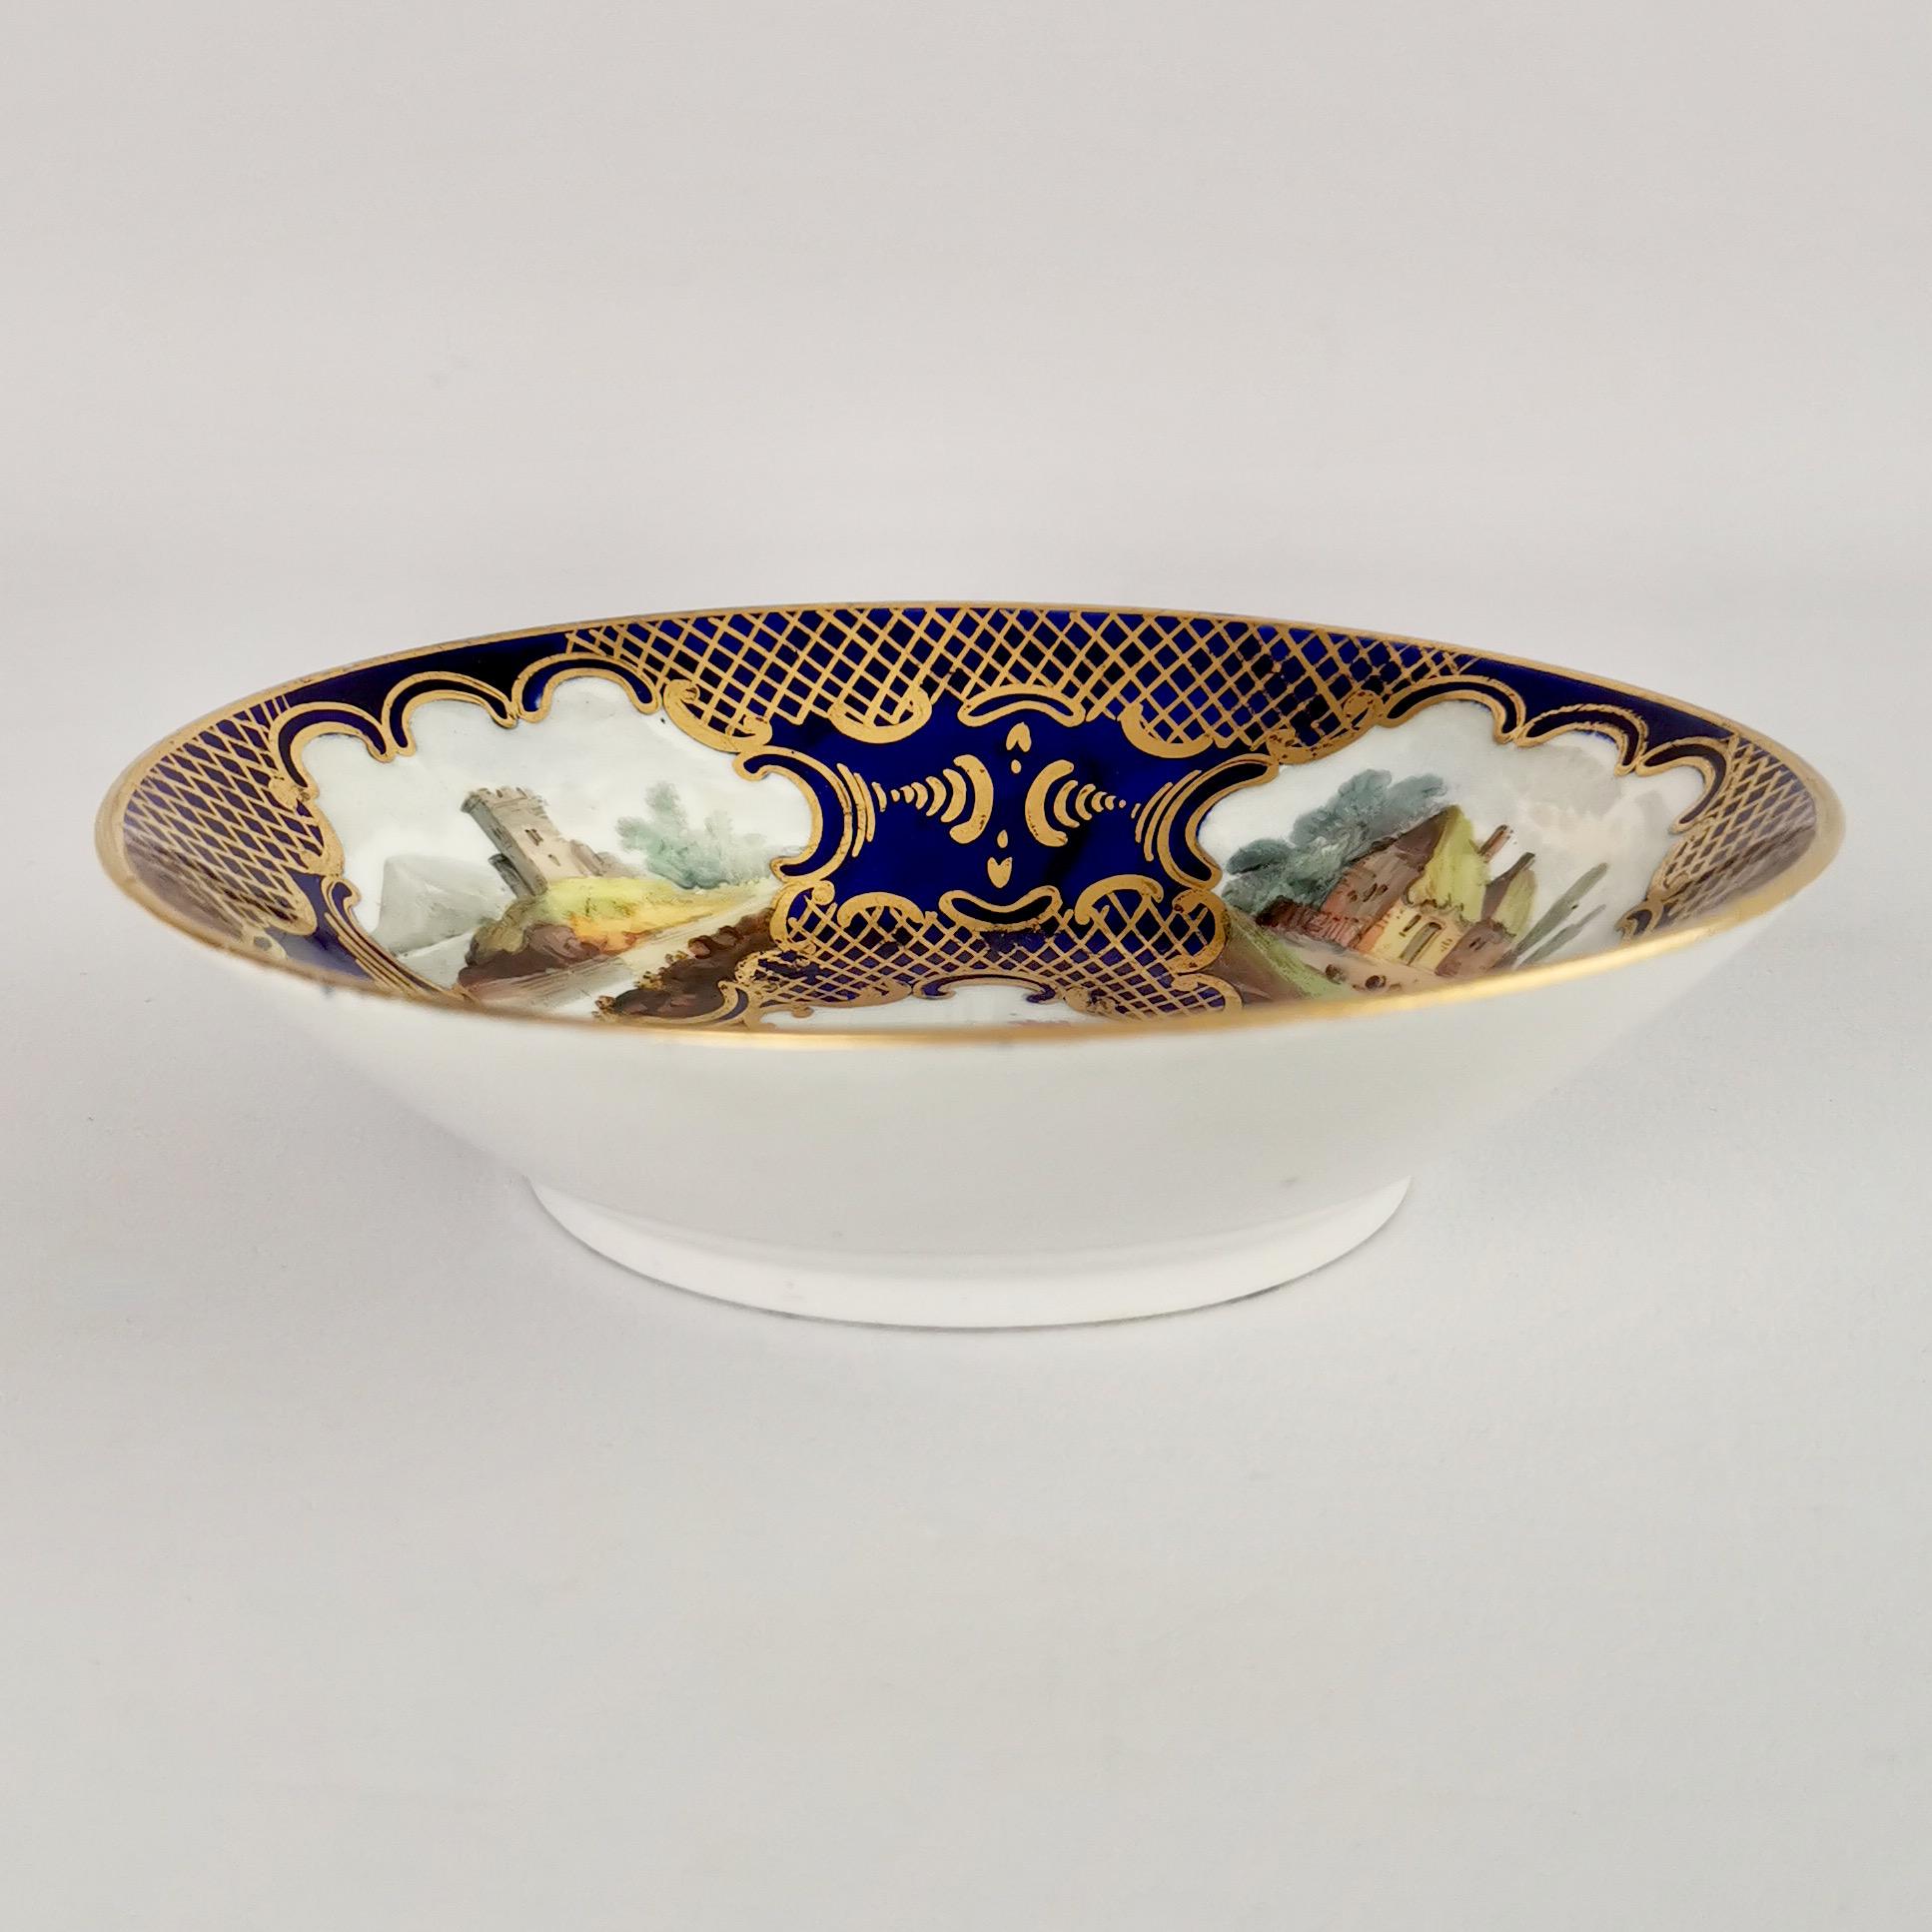 Early 19th Century Staffordshire Orphaned Saucer, Cobalt Blue, Gilt and Landscapes, Regency ca 1815